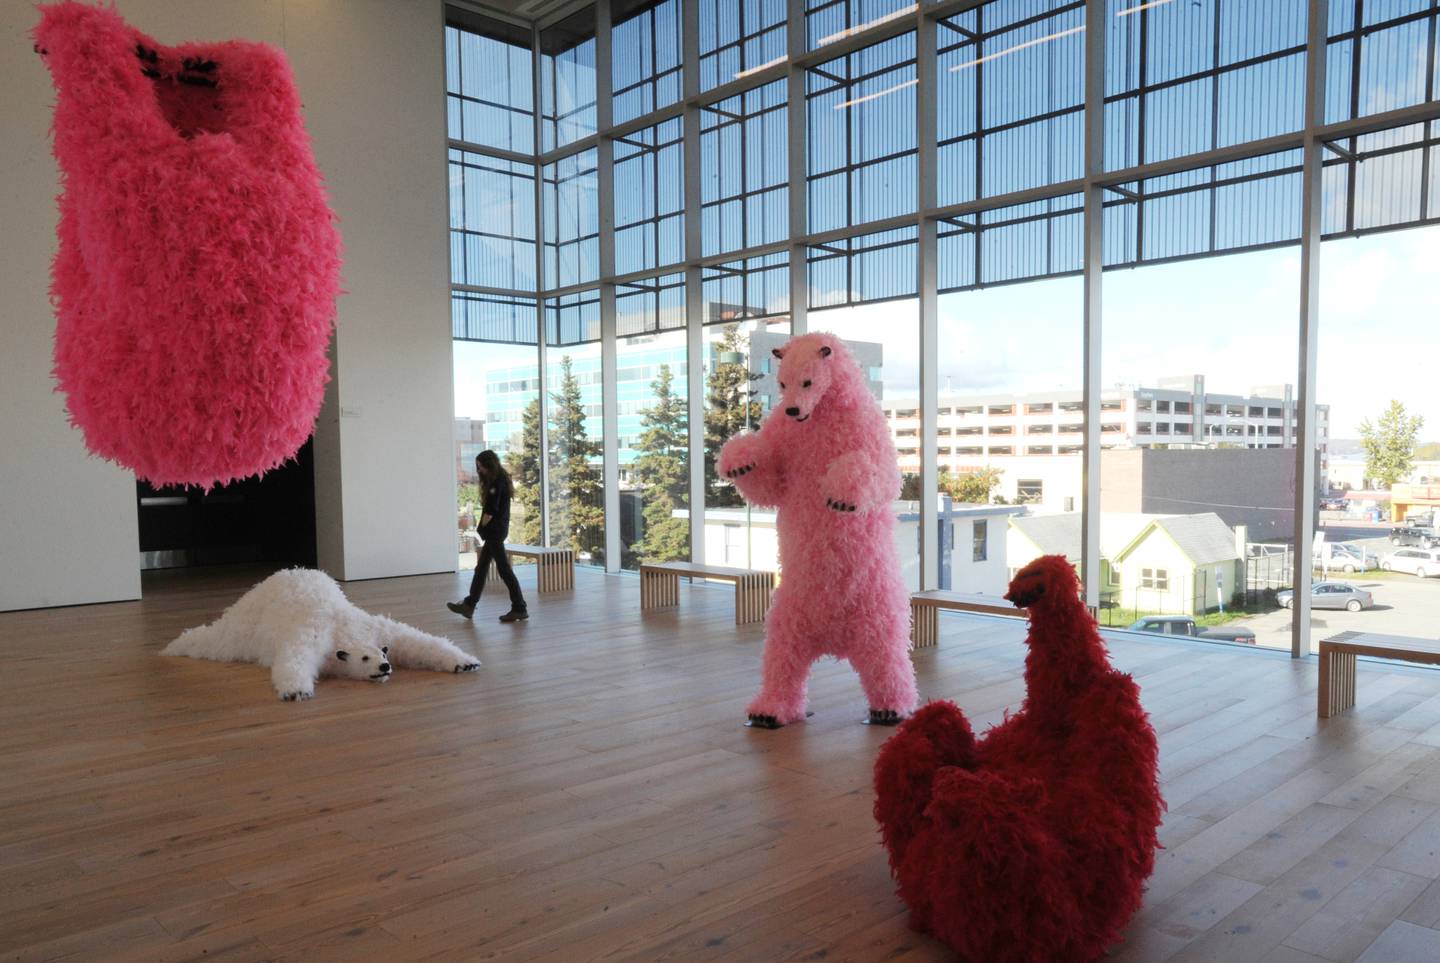 Polar bears exhibit by Paola Pivi at the Anchorage Museum